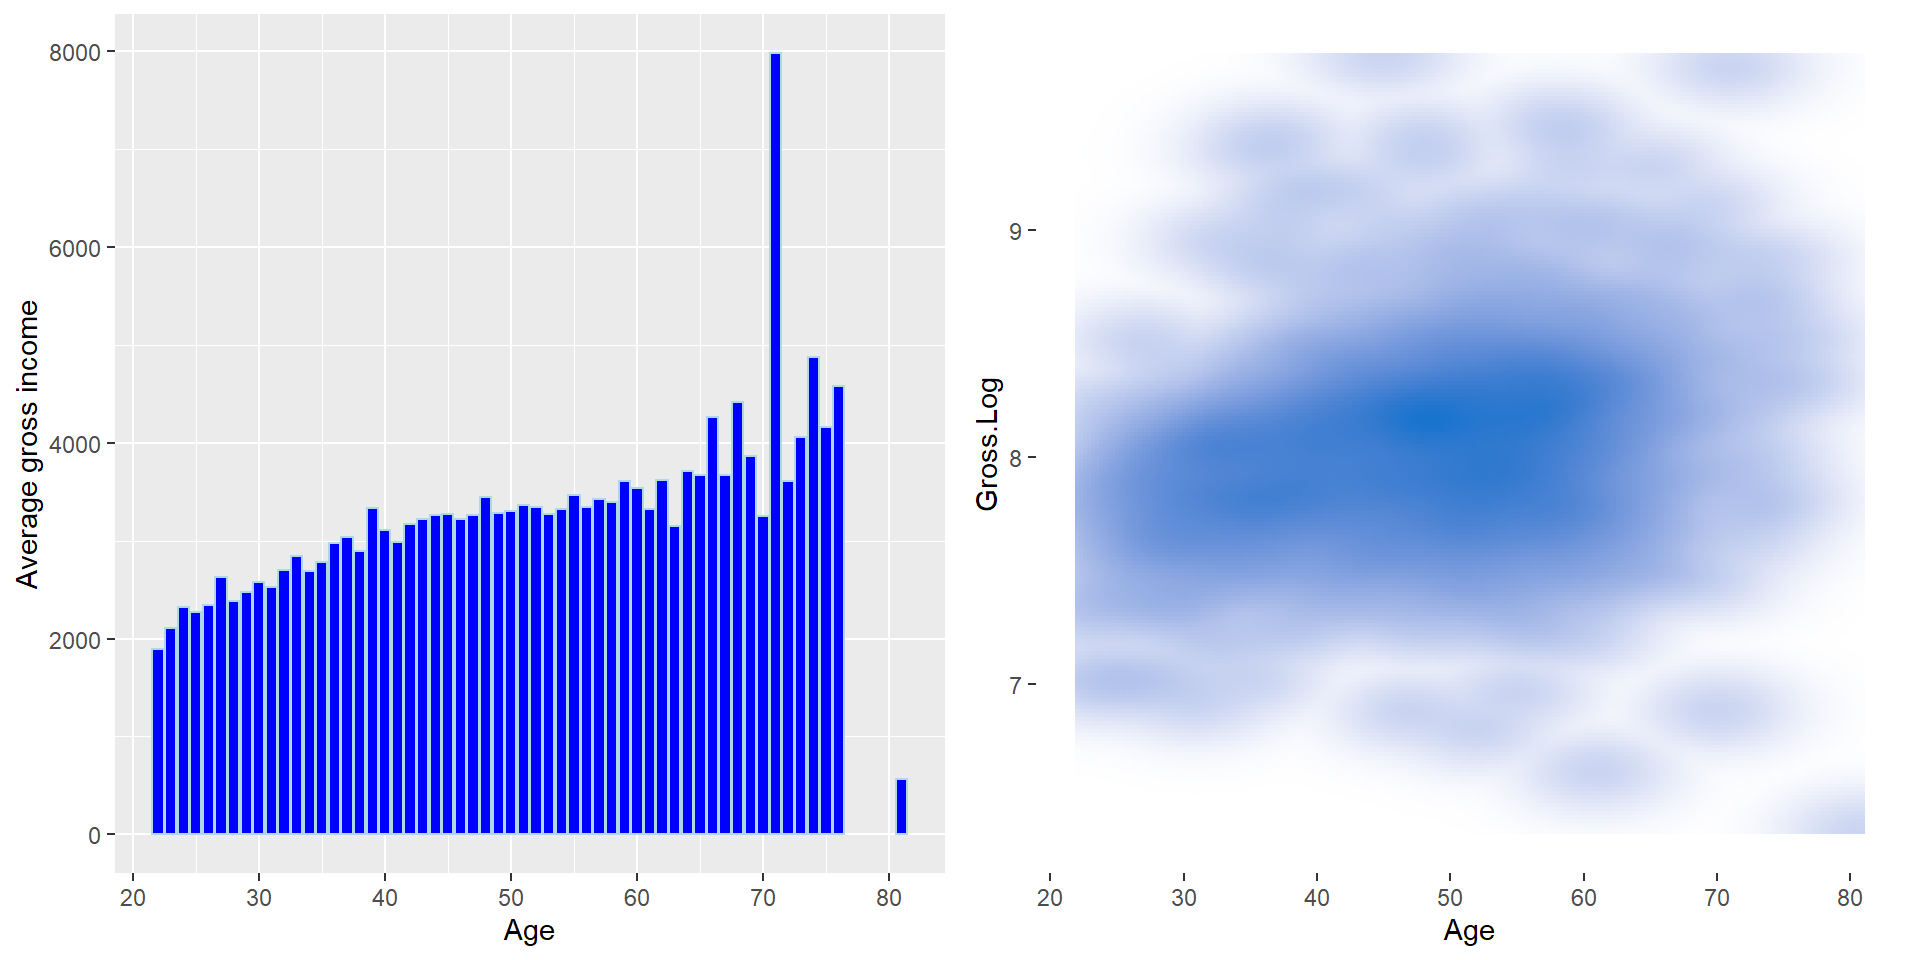 Average gross and log of gross distribution by age.